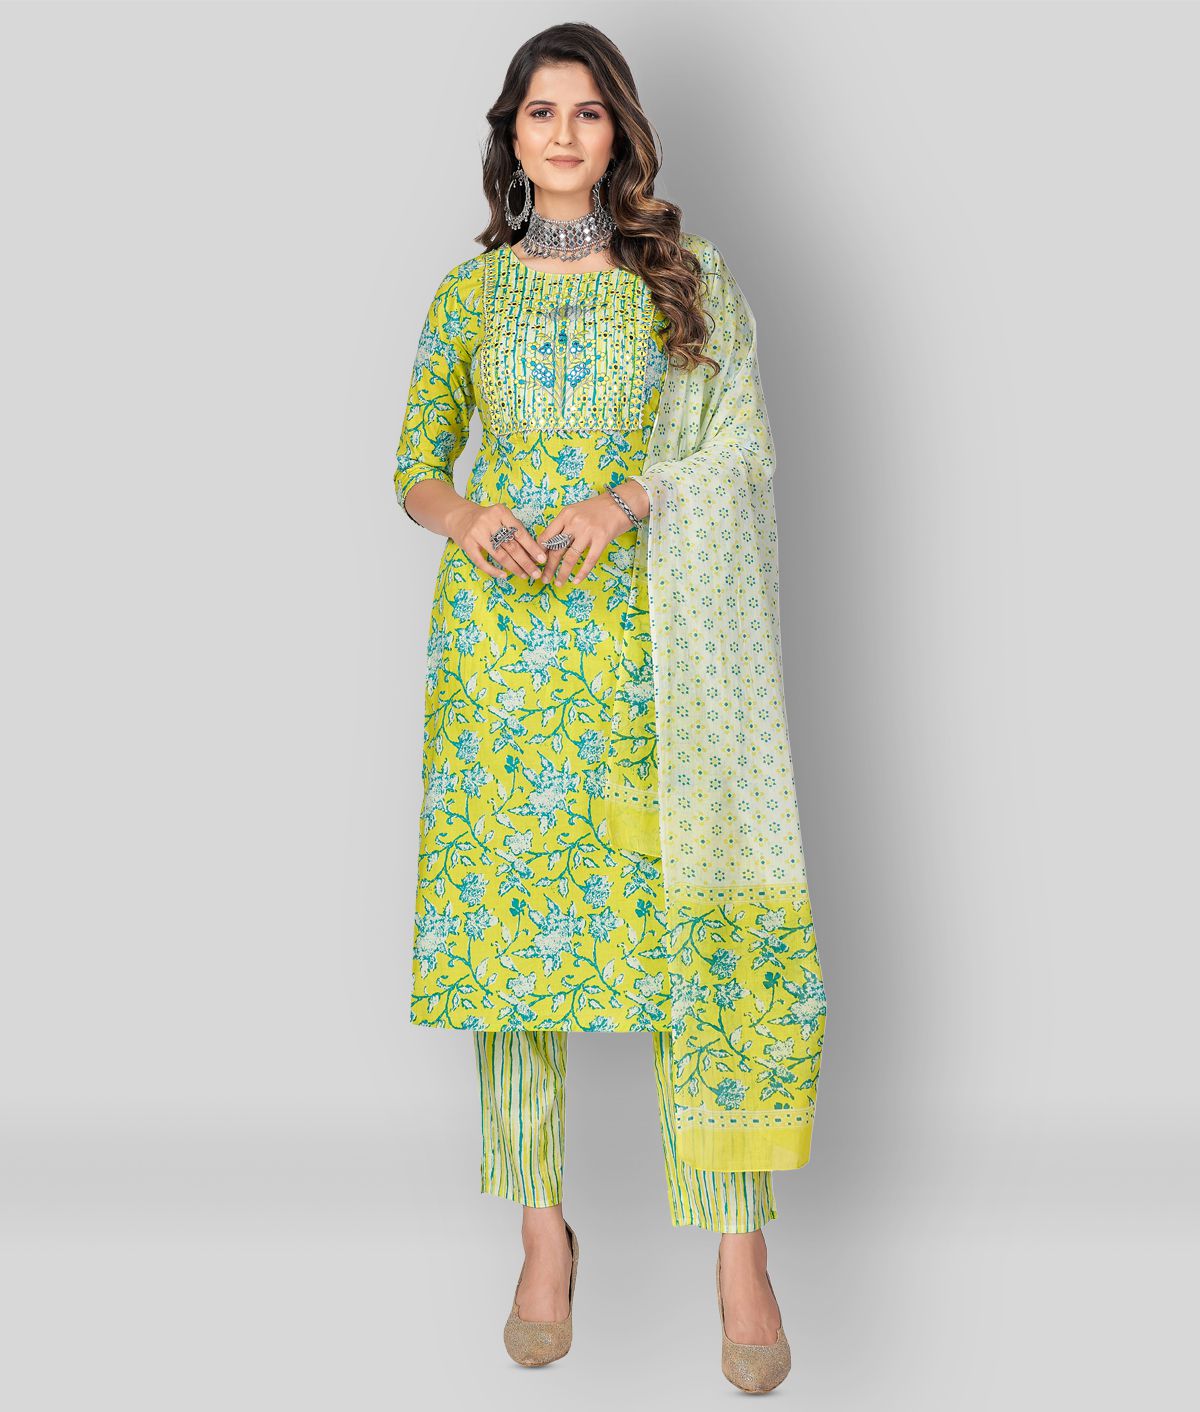     			Vbuyz - Yellow Straight Cotton Women's Stitched Salwar Suit ( Pack of 1 )